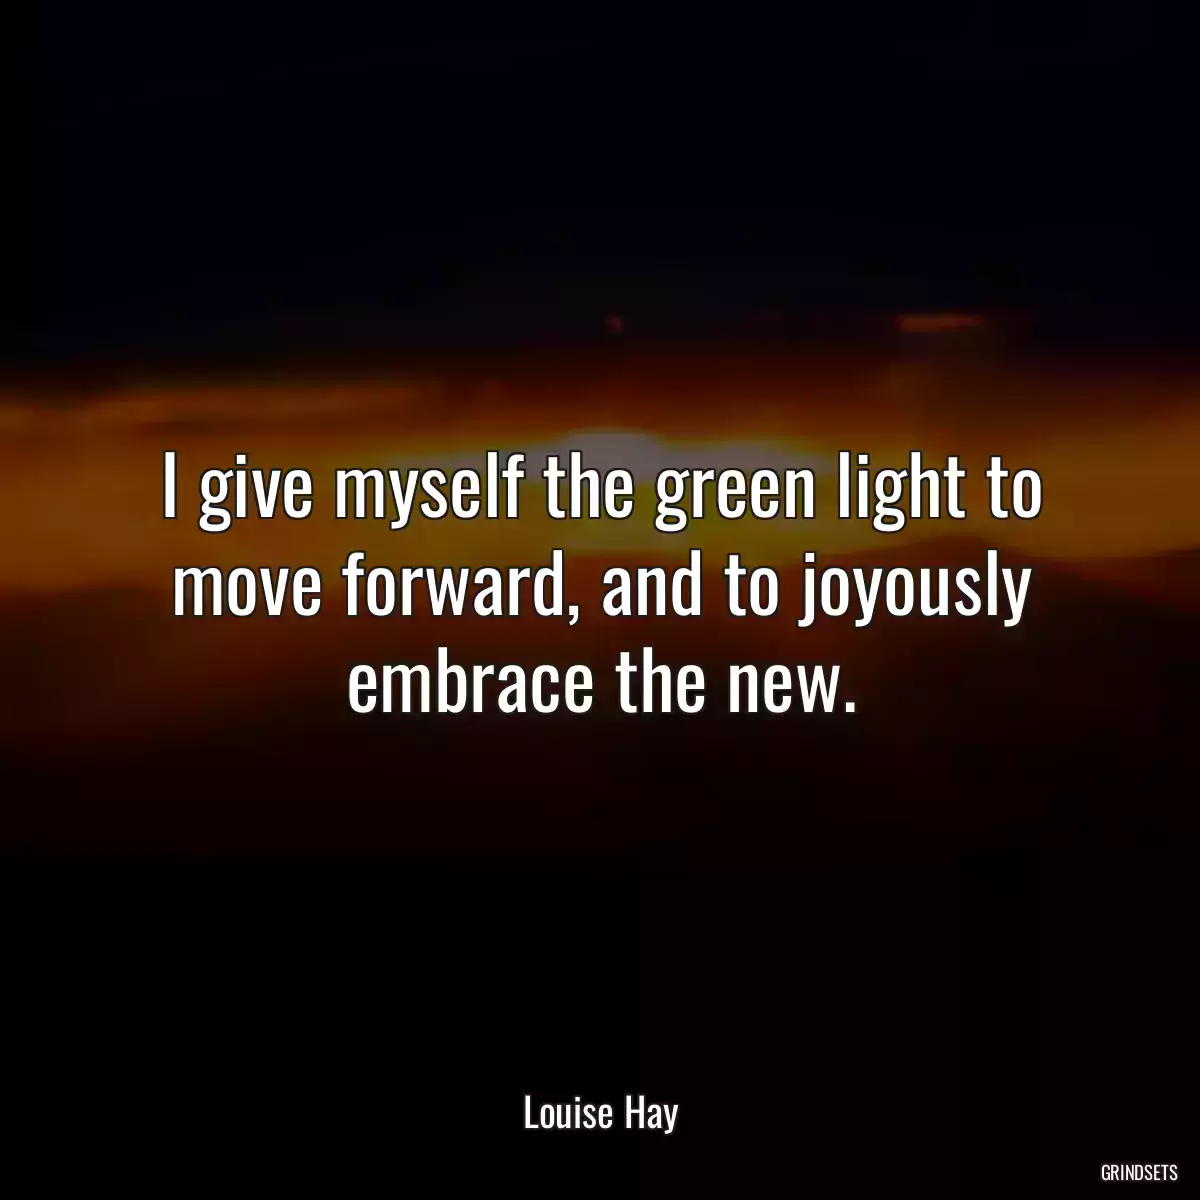 I give myself the green light to move forward, and to joyously embrace the new.